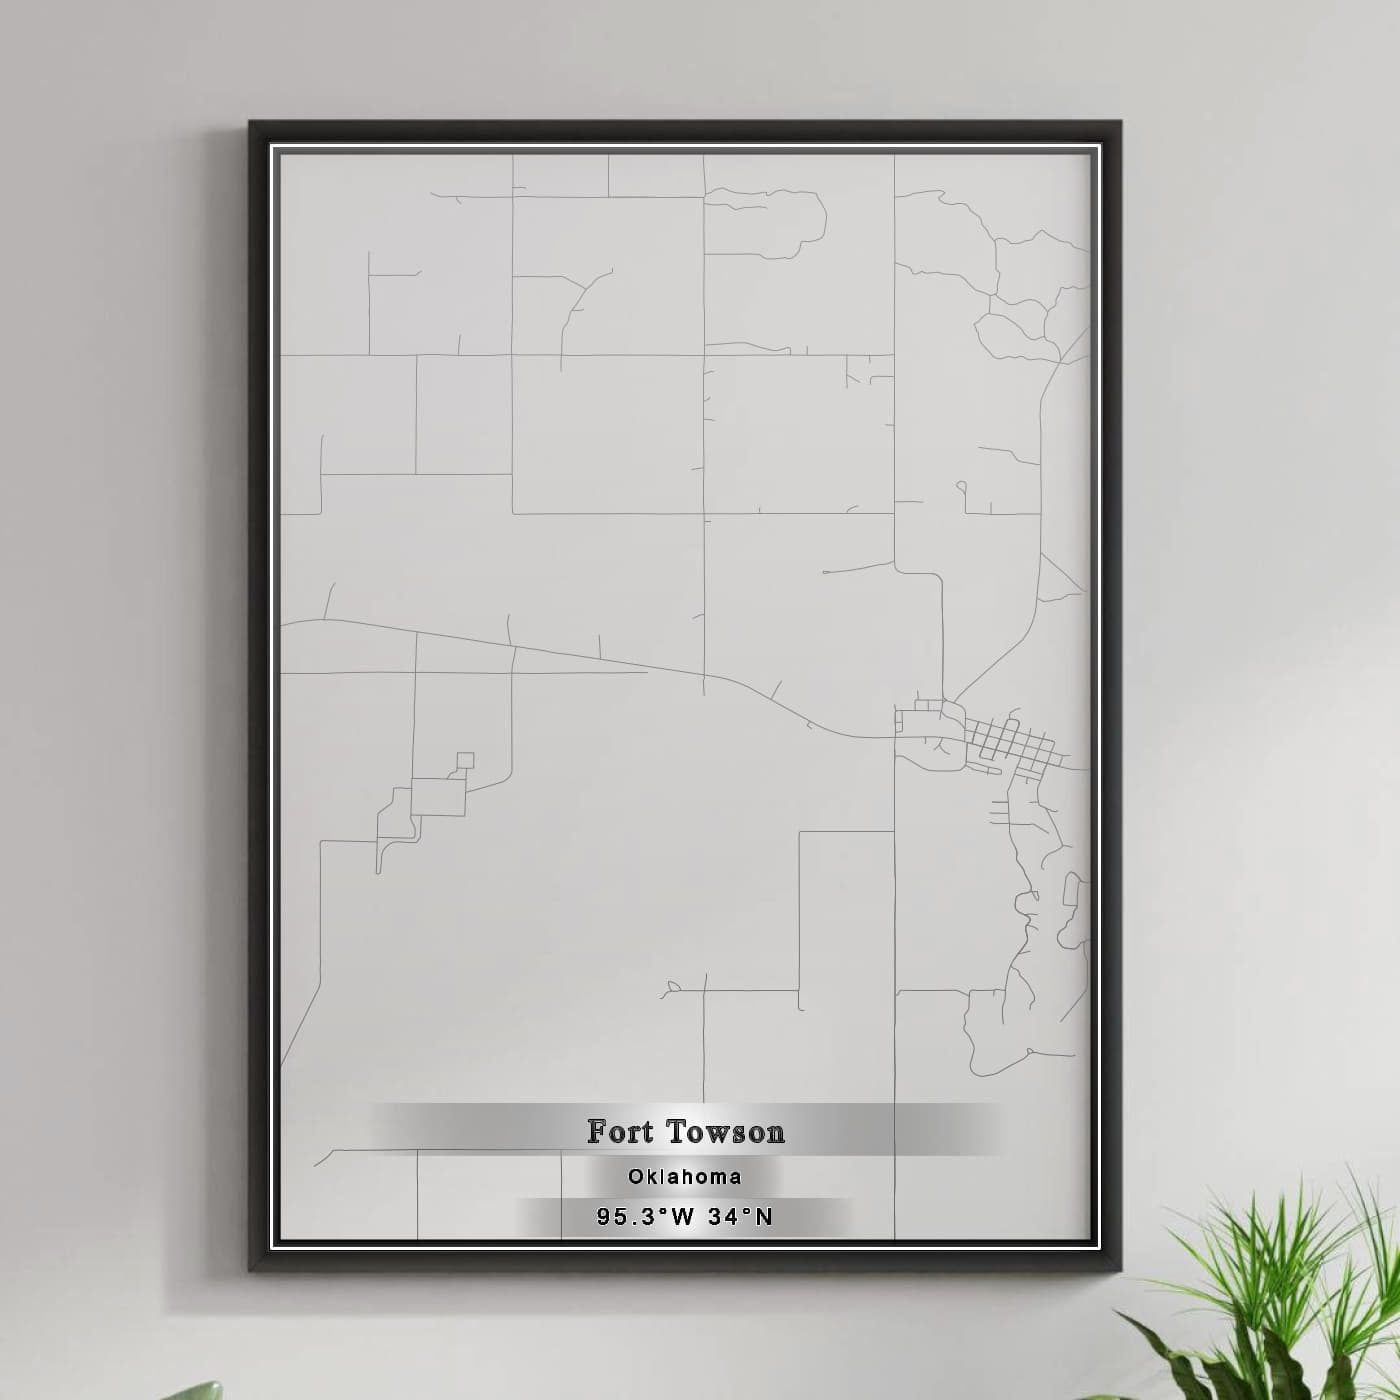 ROAD MAP OF FORT TOWSON, OKLAHOMA BY MAPBAKES